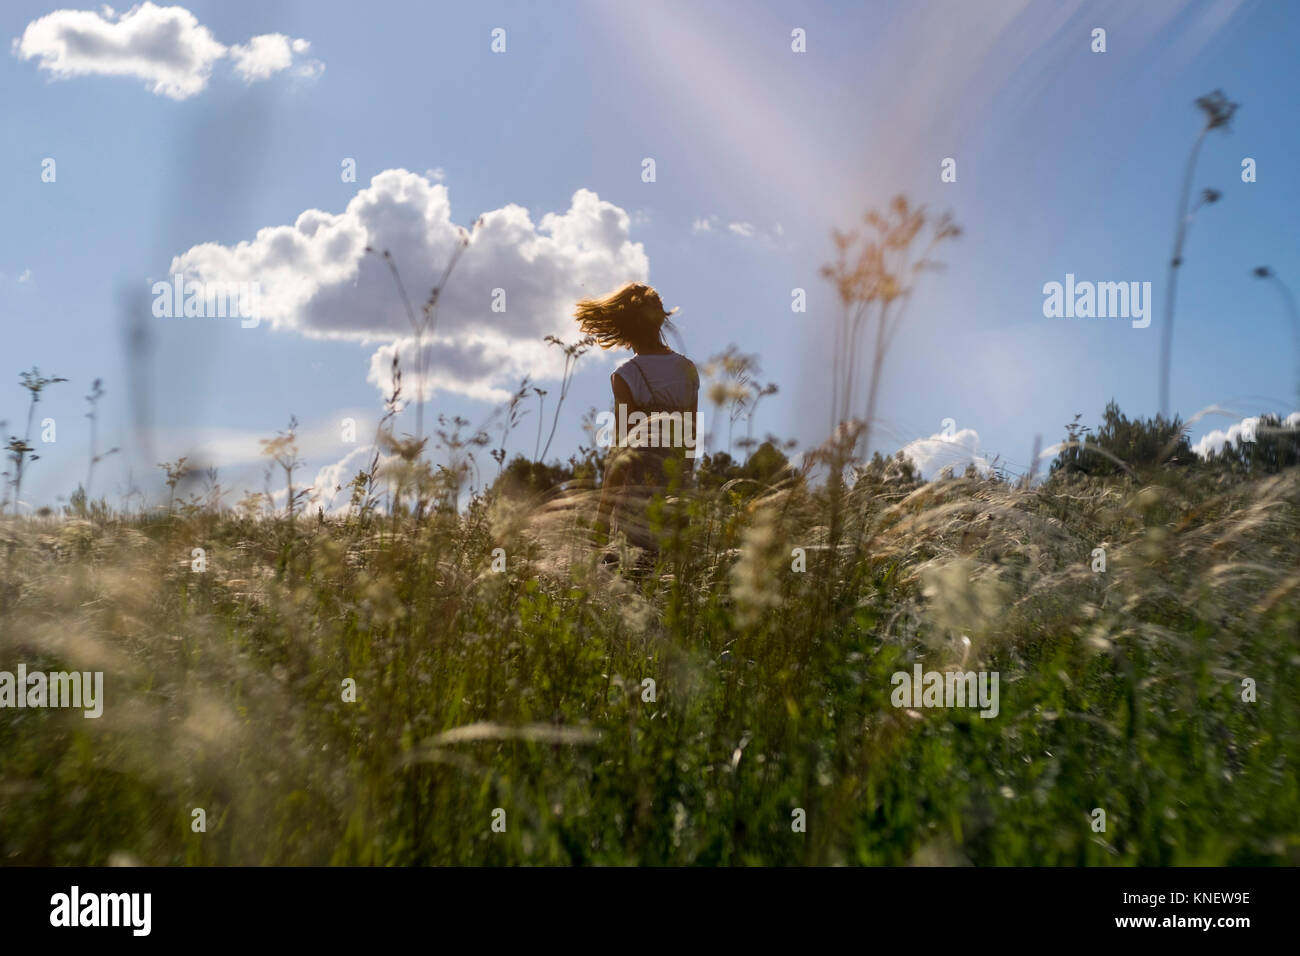 Woman standing in field, looking at view, hair blowing in wind, rear view, Ural, Chelyabinsk, Russia, Europe Stock Photo